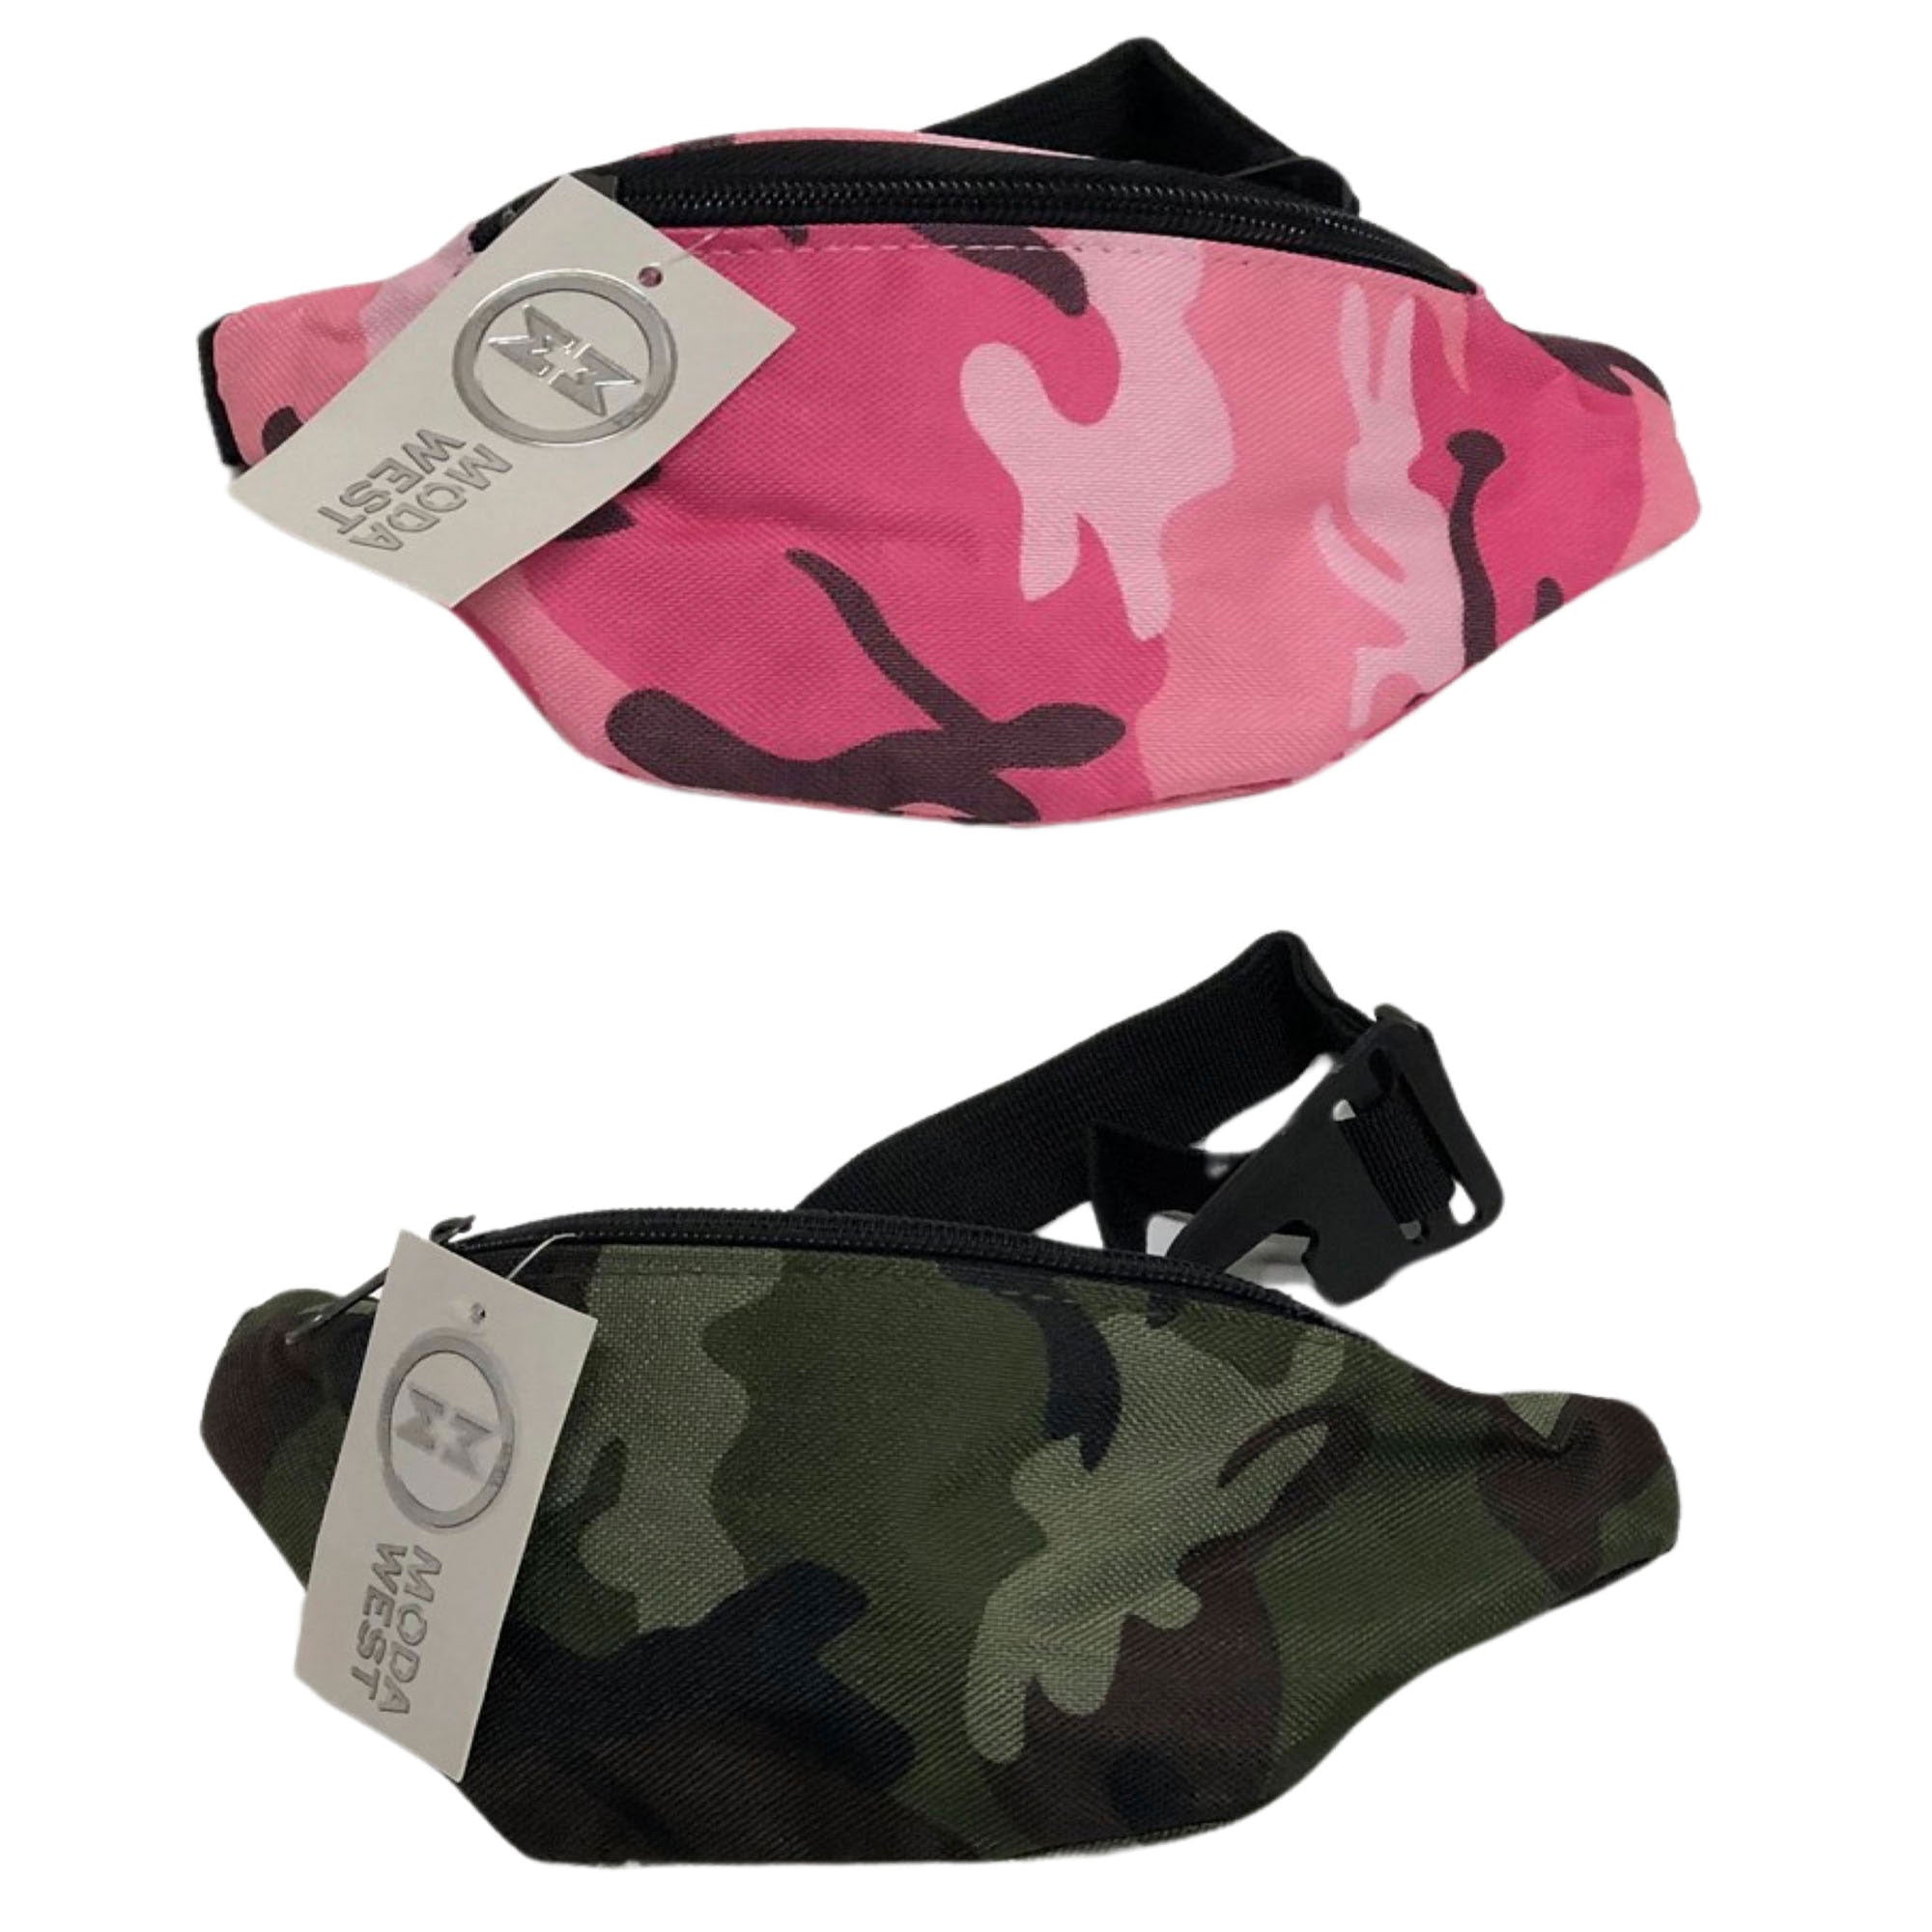 CLEARANCE KIDS FANNY PACKS (CASE OF 60 - $1.25 / PIECE) - Wholesale Children's Fanny Bags in Camo Prints SKU: WP202-CAMO-60